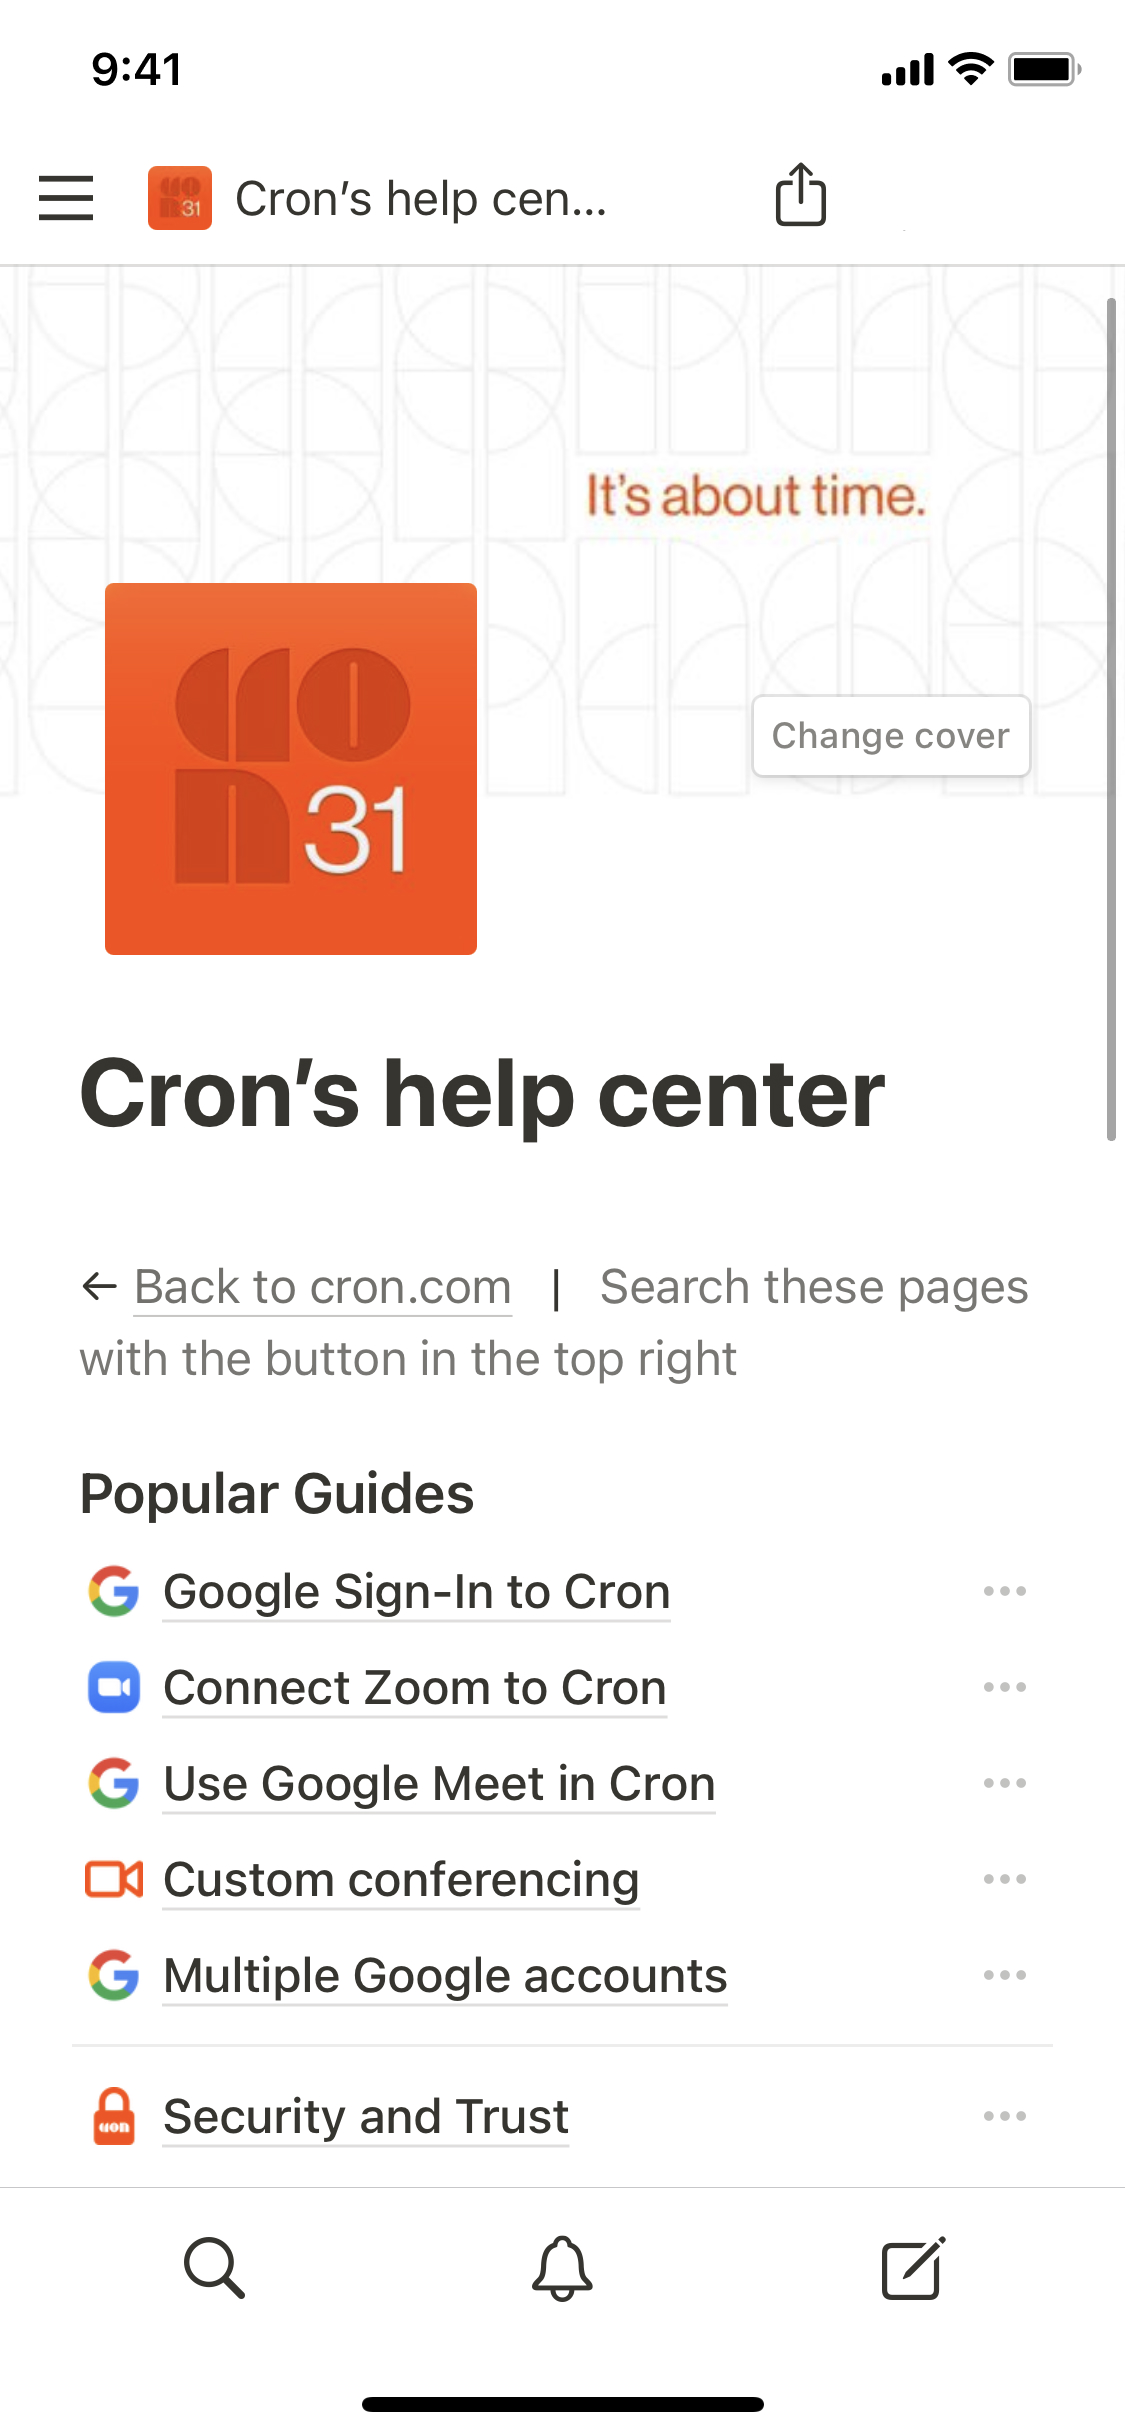 Mobile image for Cron's help center template